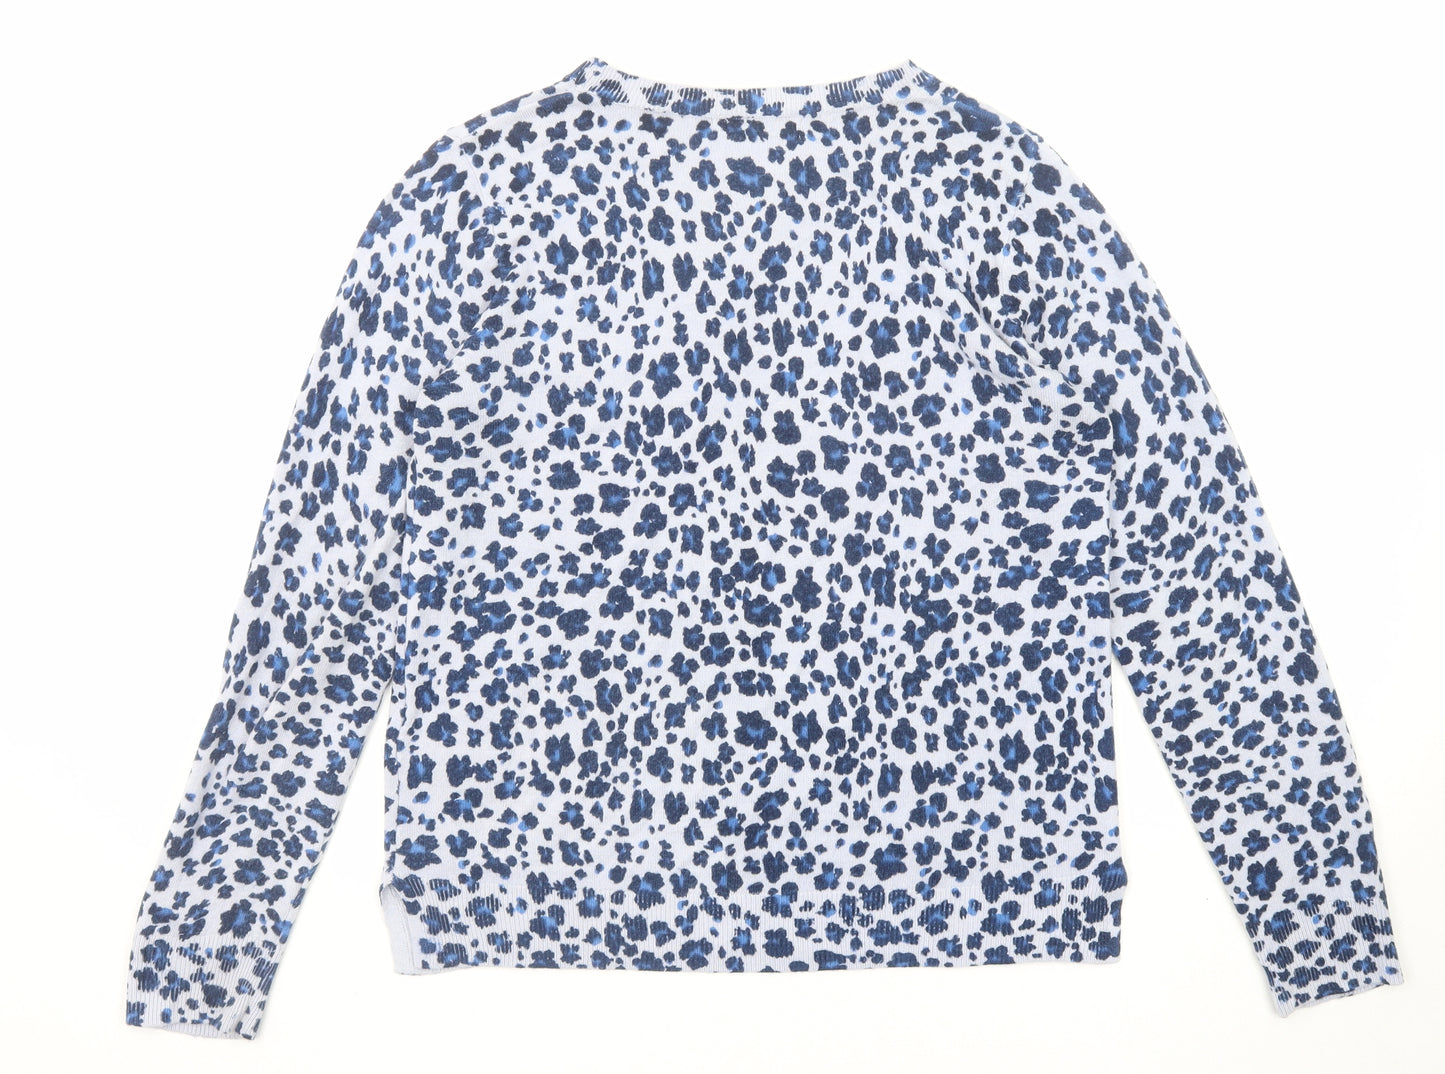 Marks and Spencer Womens Blue Round Neck Animal Print Acrylic Pullover Jumper Size 14 - Leopard Print